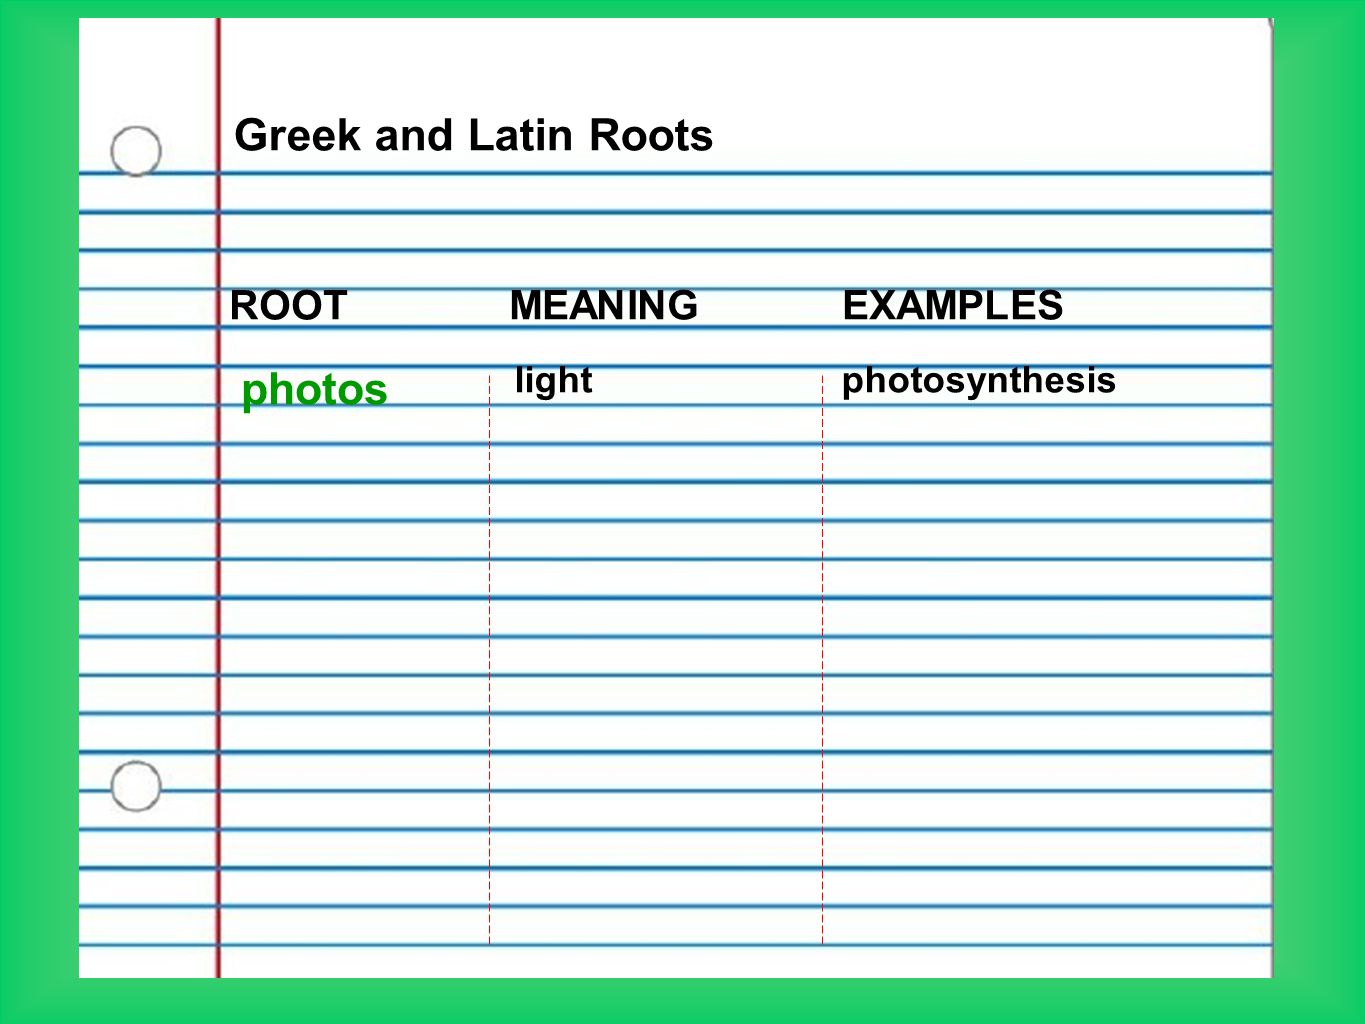 Greek and Latin Roots photos ROOT MEANING EXAMPLES